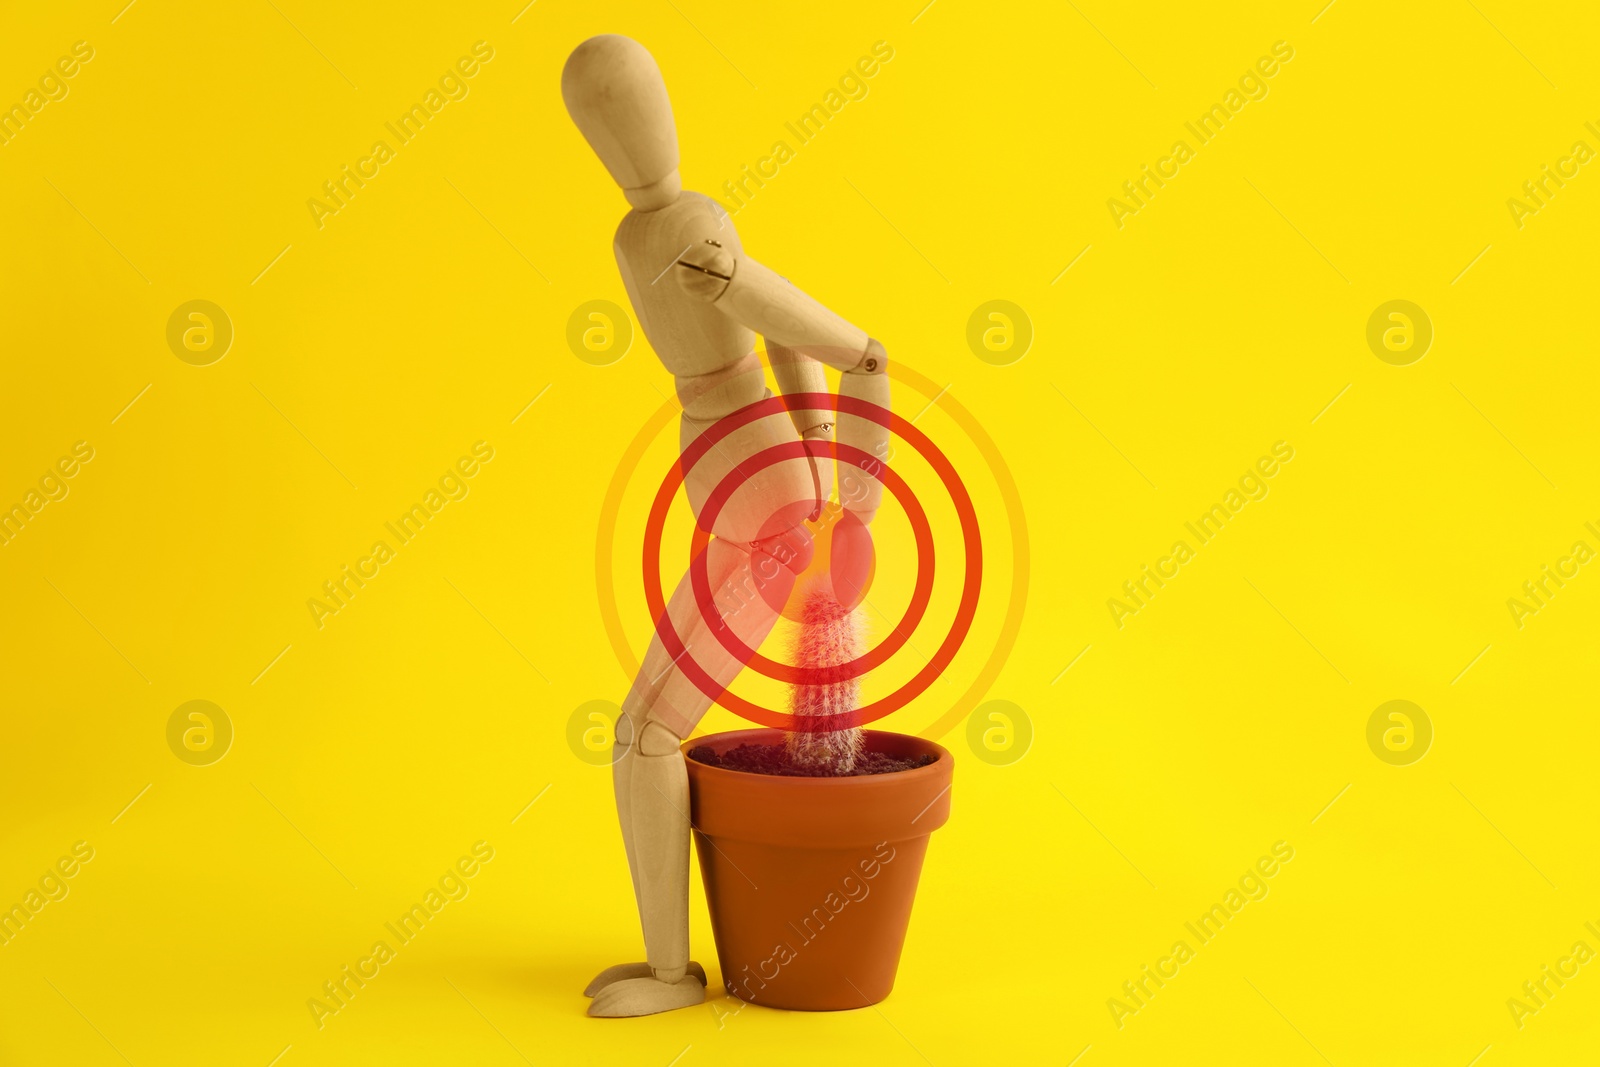 Image of Hemorrhoid concept. Wooden human figure and cactus on yellow background